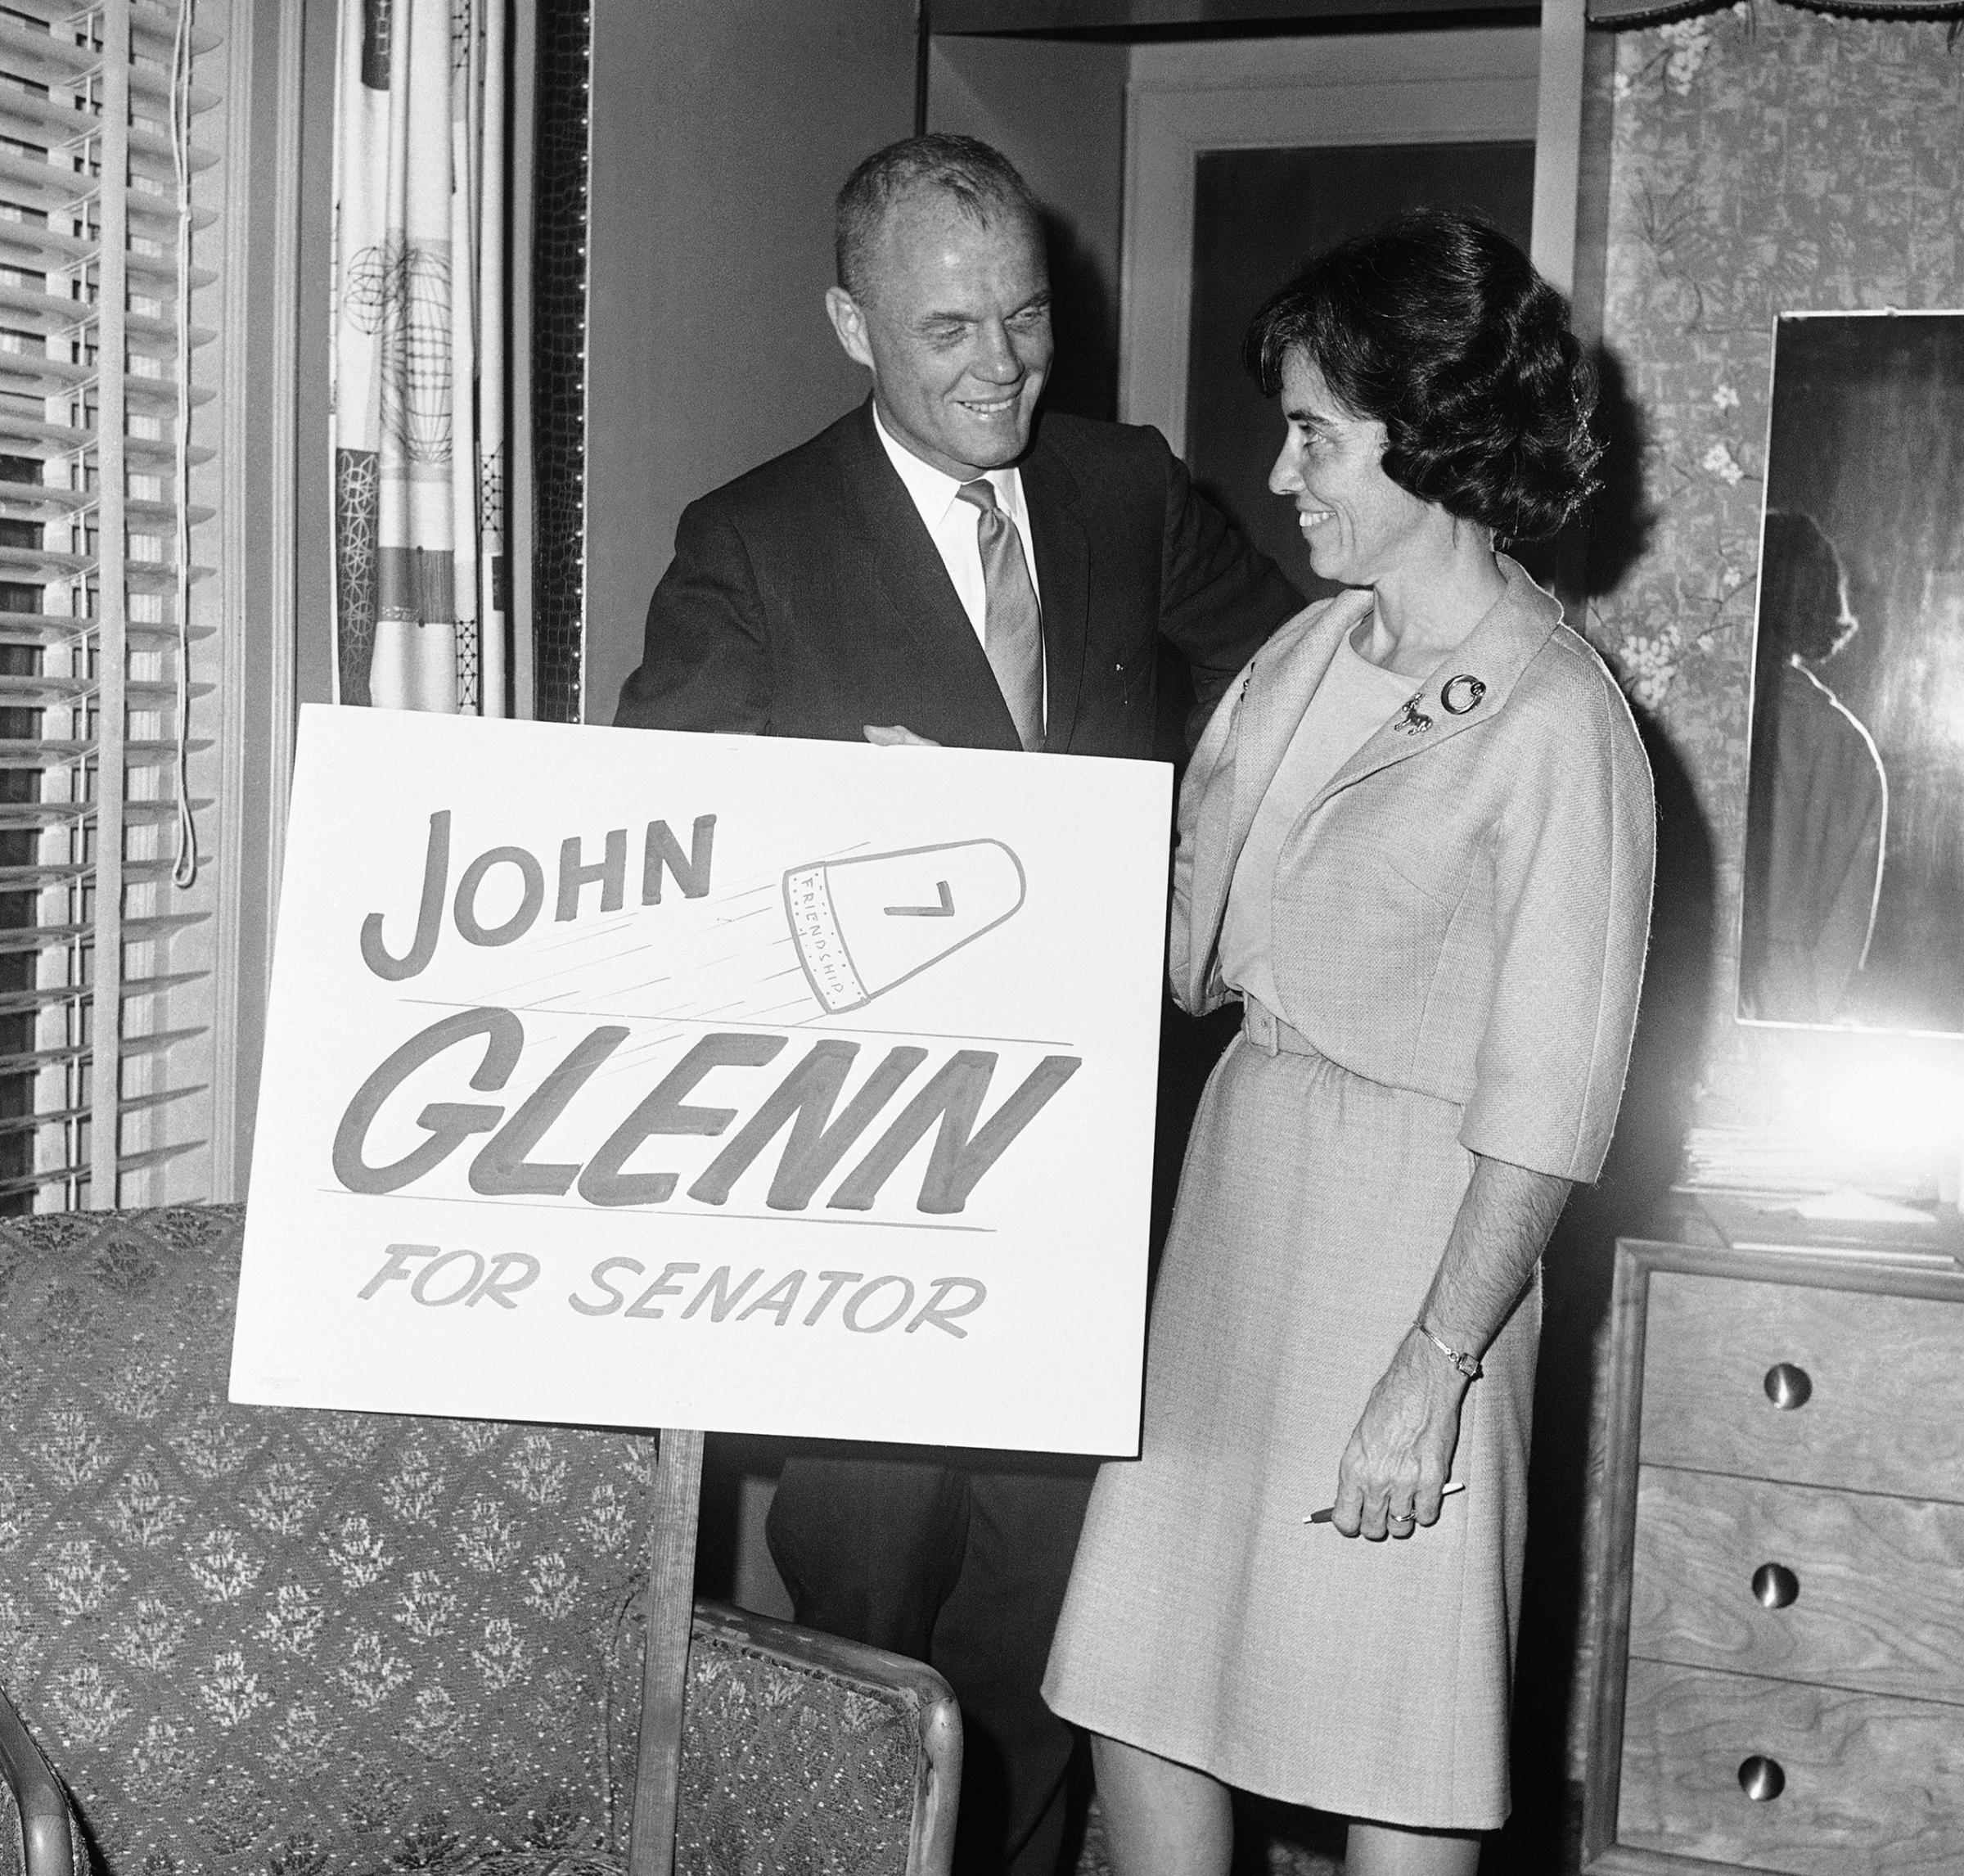 A Bid for the Senate Glenn entered politics in 1964 as a Democrat, campaigning for one of Ohio's Senate seats. A fall in the bathtub that ironically injured his exhaustively tested inner ear would cause him to scrub the campaign.